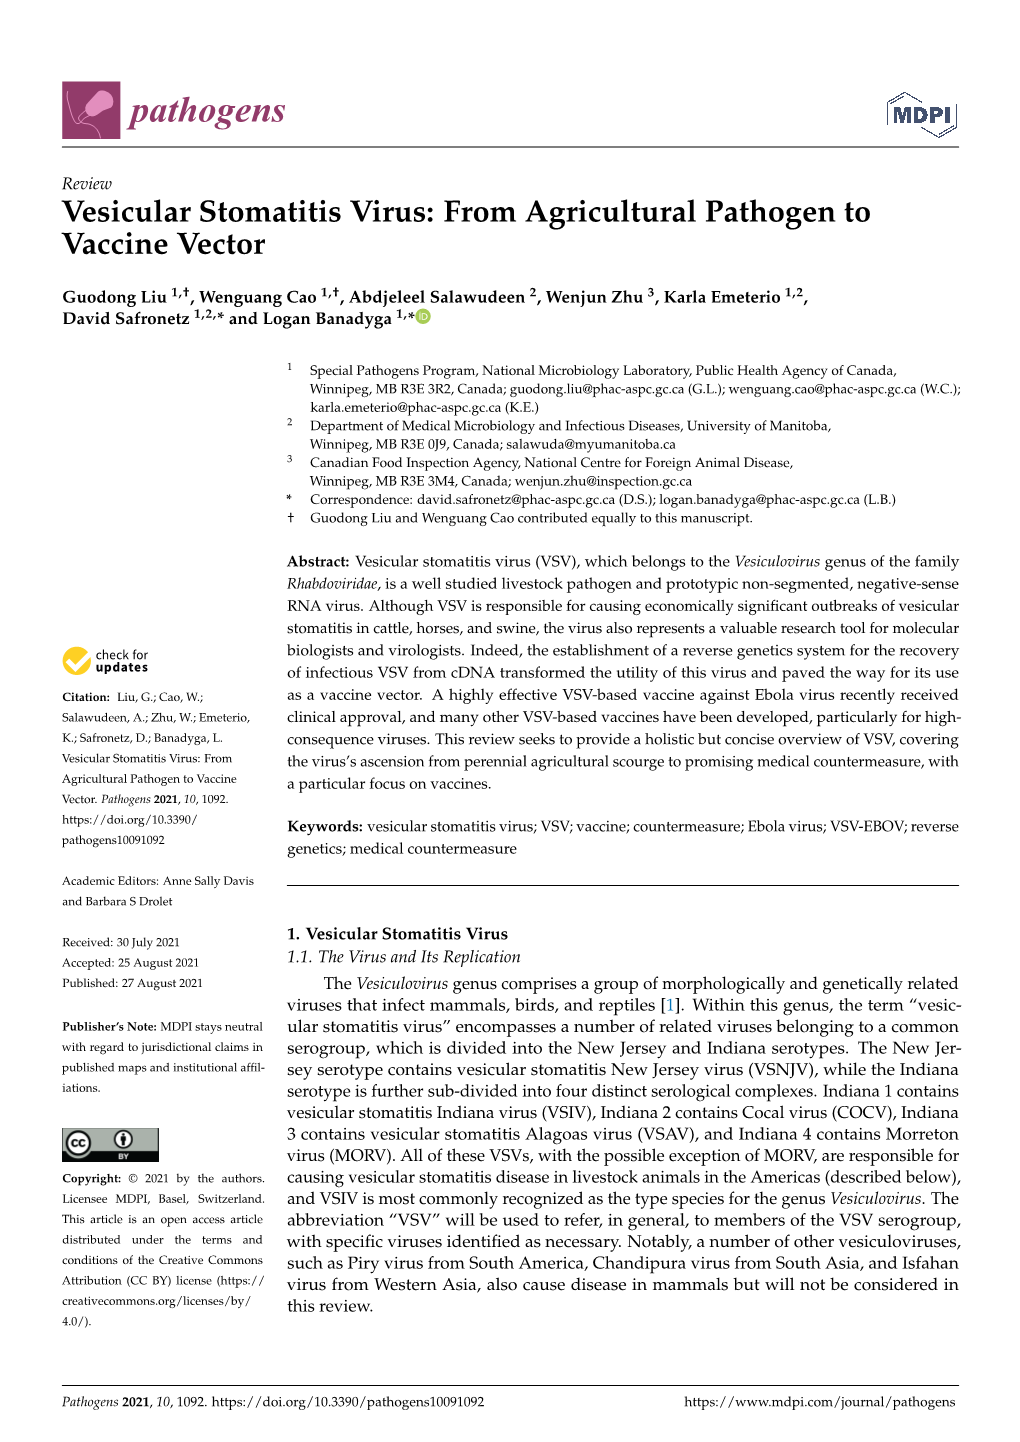 Vesicular Stomatitis Virus: from Agricultural Pathogen to Vaccine Vector